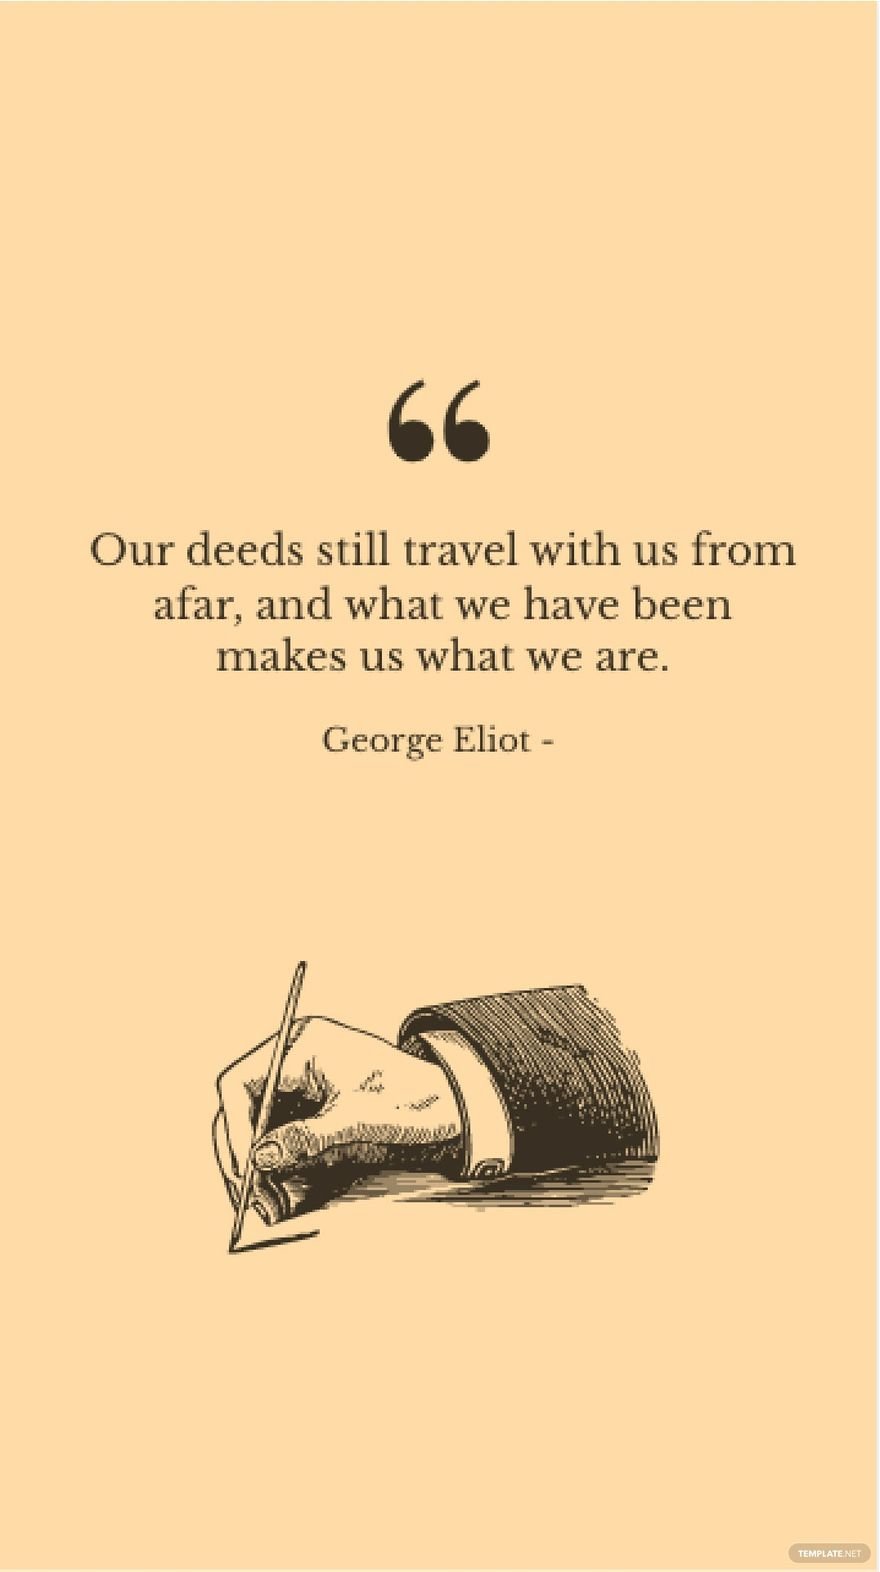 George Eliot - Our deeds still travel with us from afar, and what we have been makes us what we are.